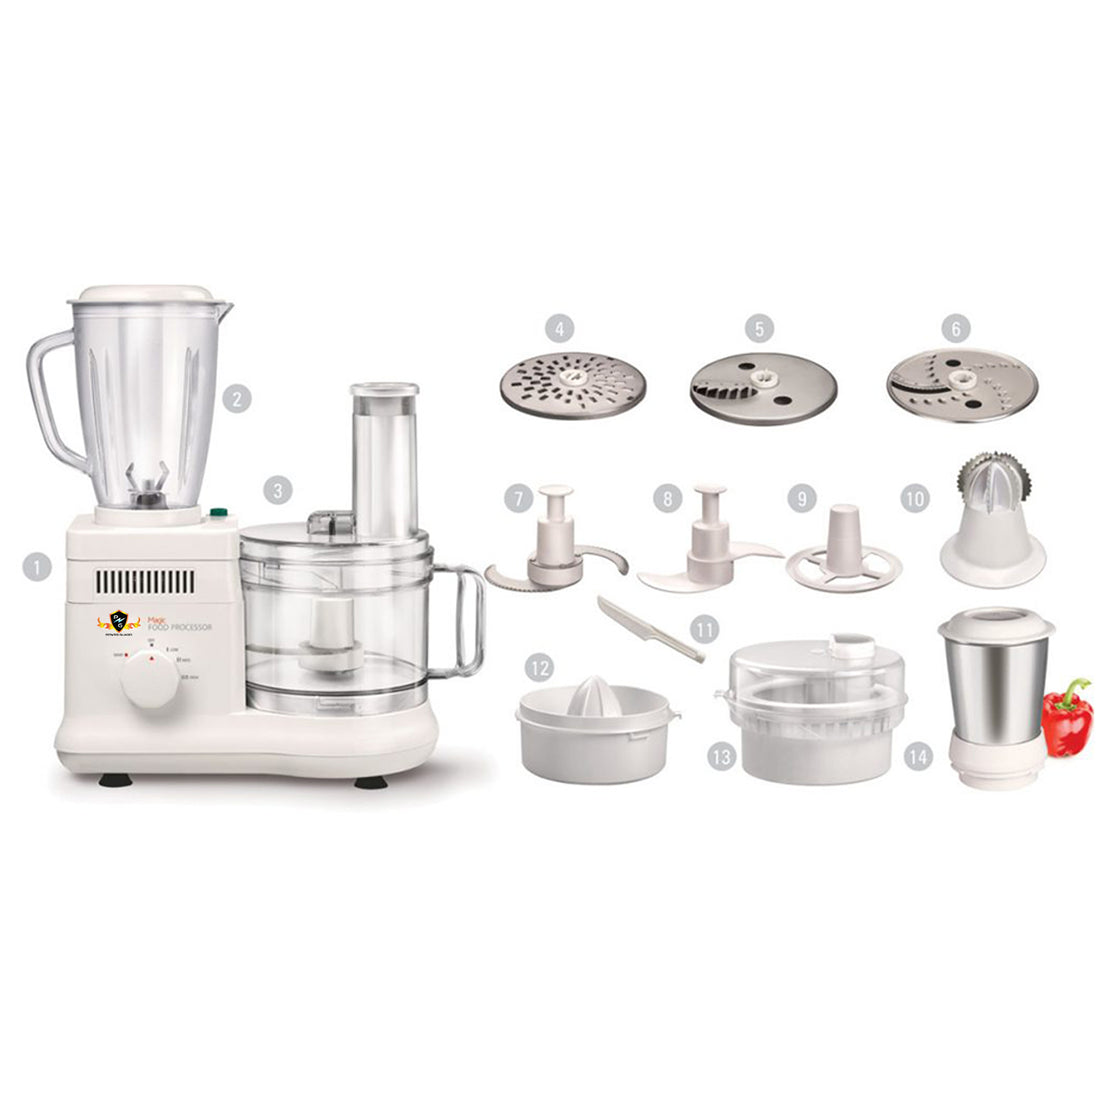 The Best Rated Food Processor for Your Kitchen Needs